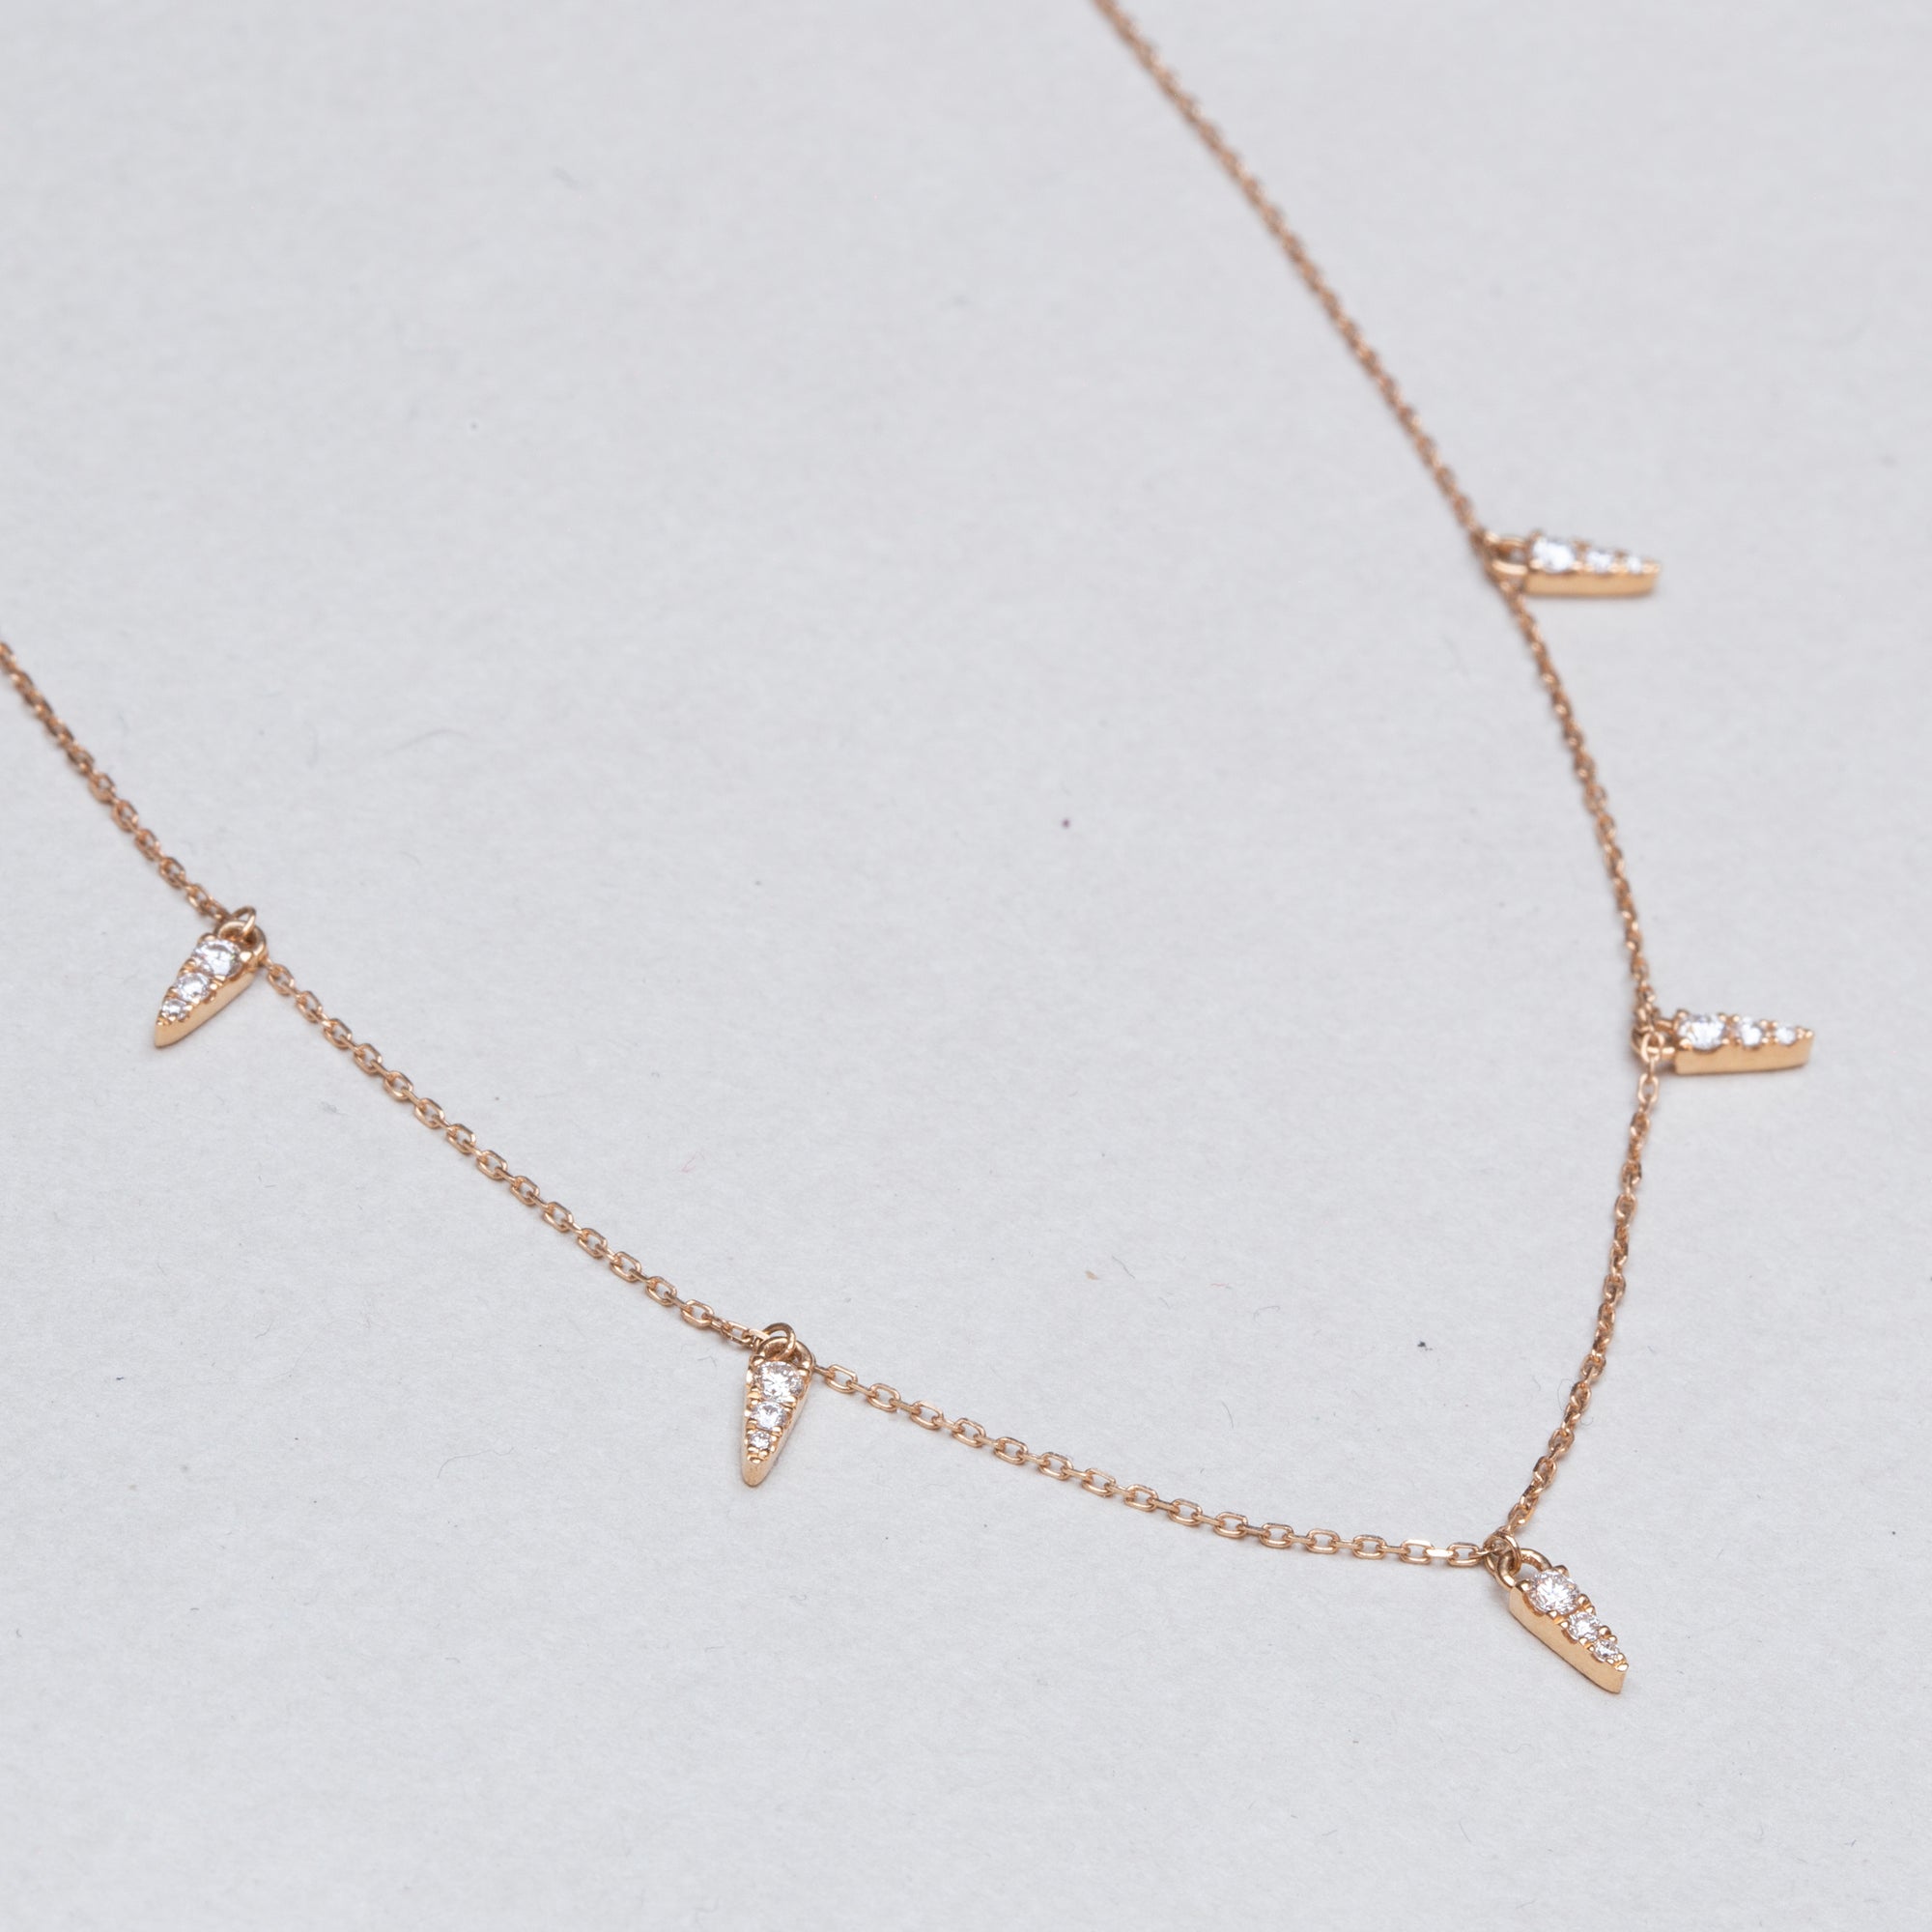 18ct Gold Diamond Spike Chain Necklace